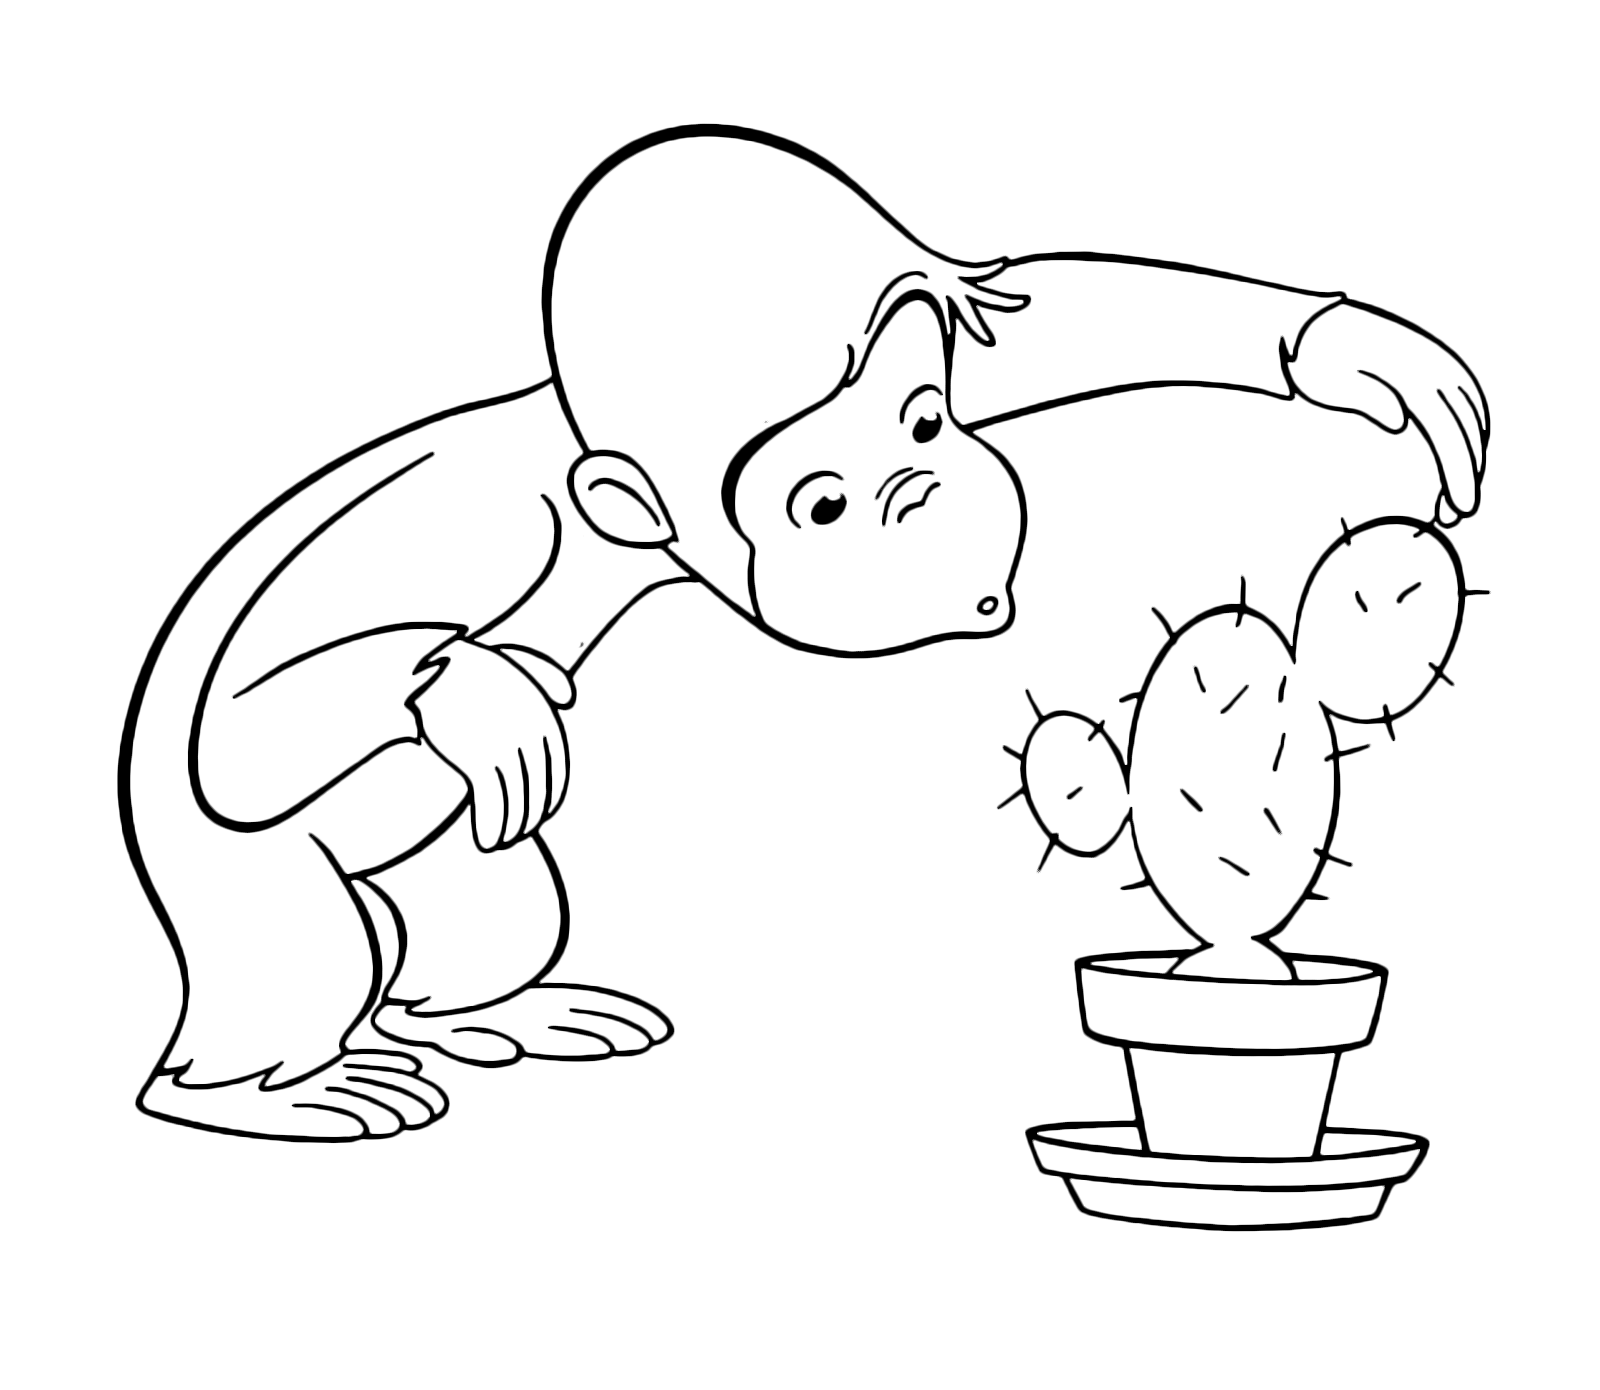 Curious George - George looks intrigued a cactus plant